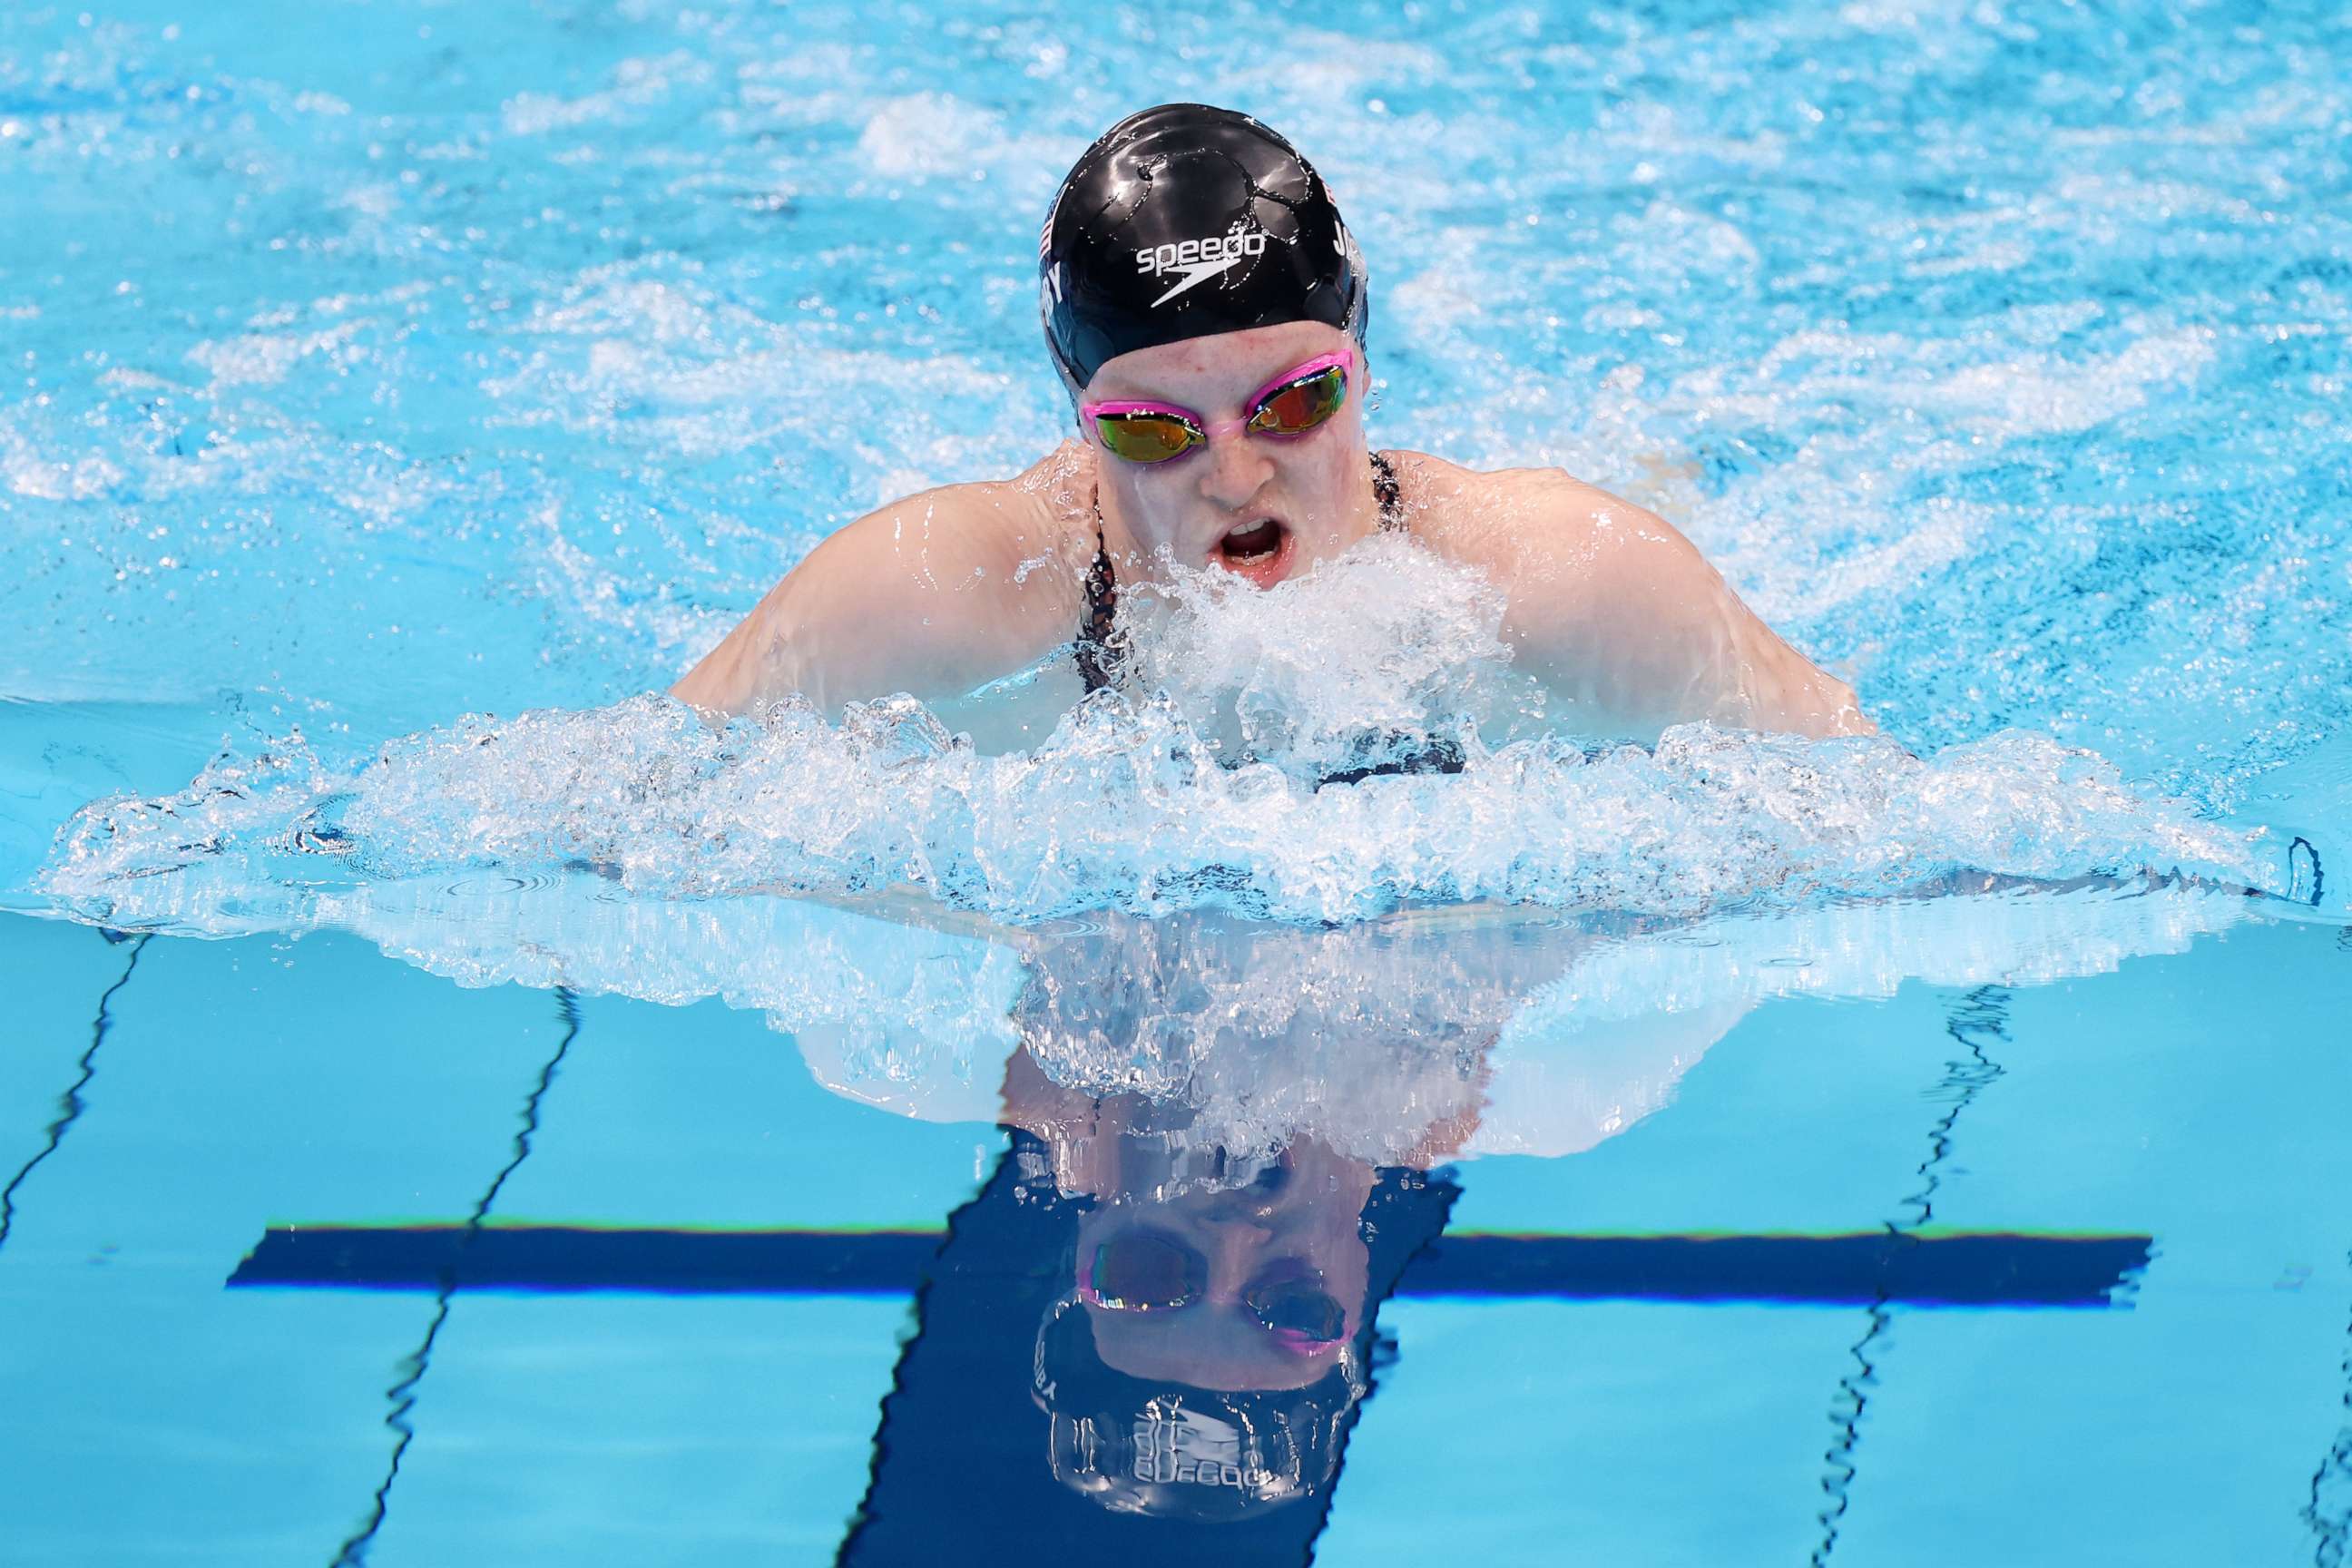 PHOTO: Lydia Jacoby of Team United States competes in the Women's 100m Breaststroke Final on day four of the Tokyo 2020 Olympic Games at Tokyo Aquatics Centre on July 27, 2021, in Tokyo.